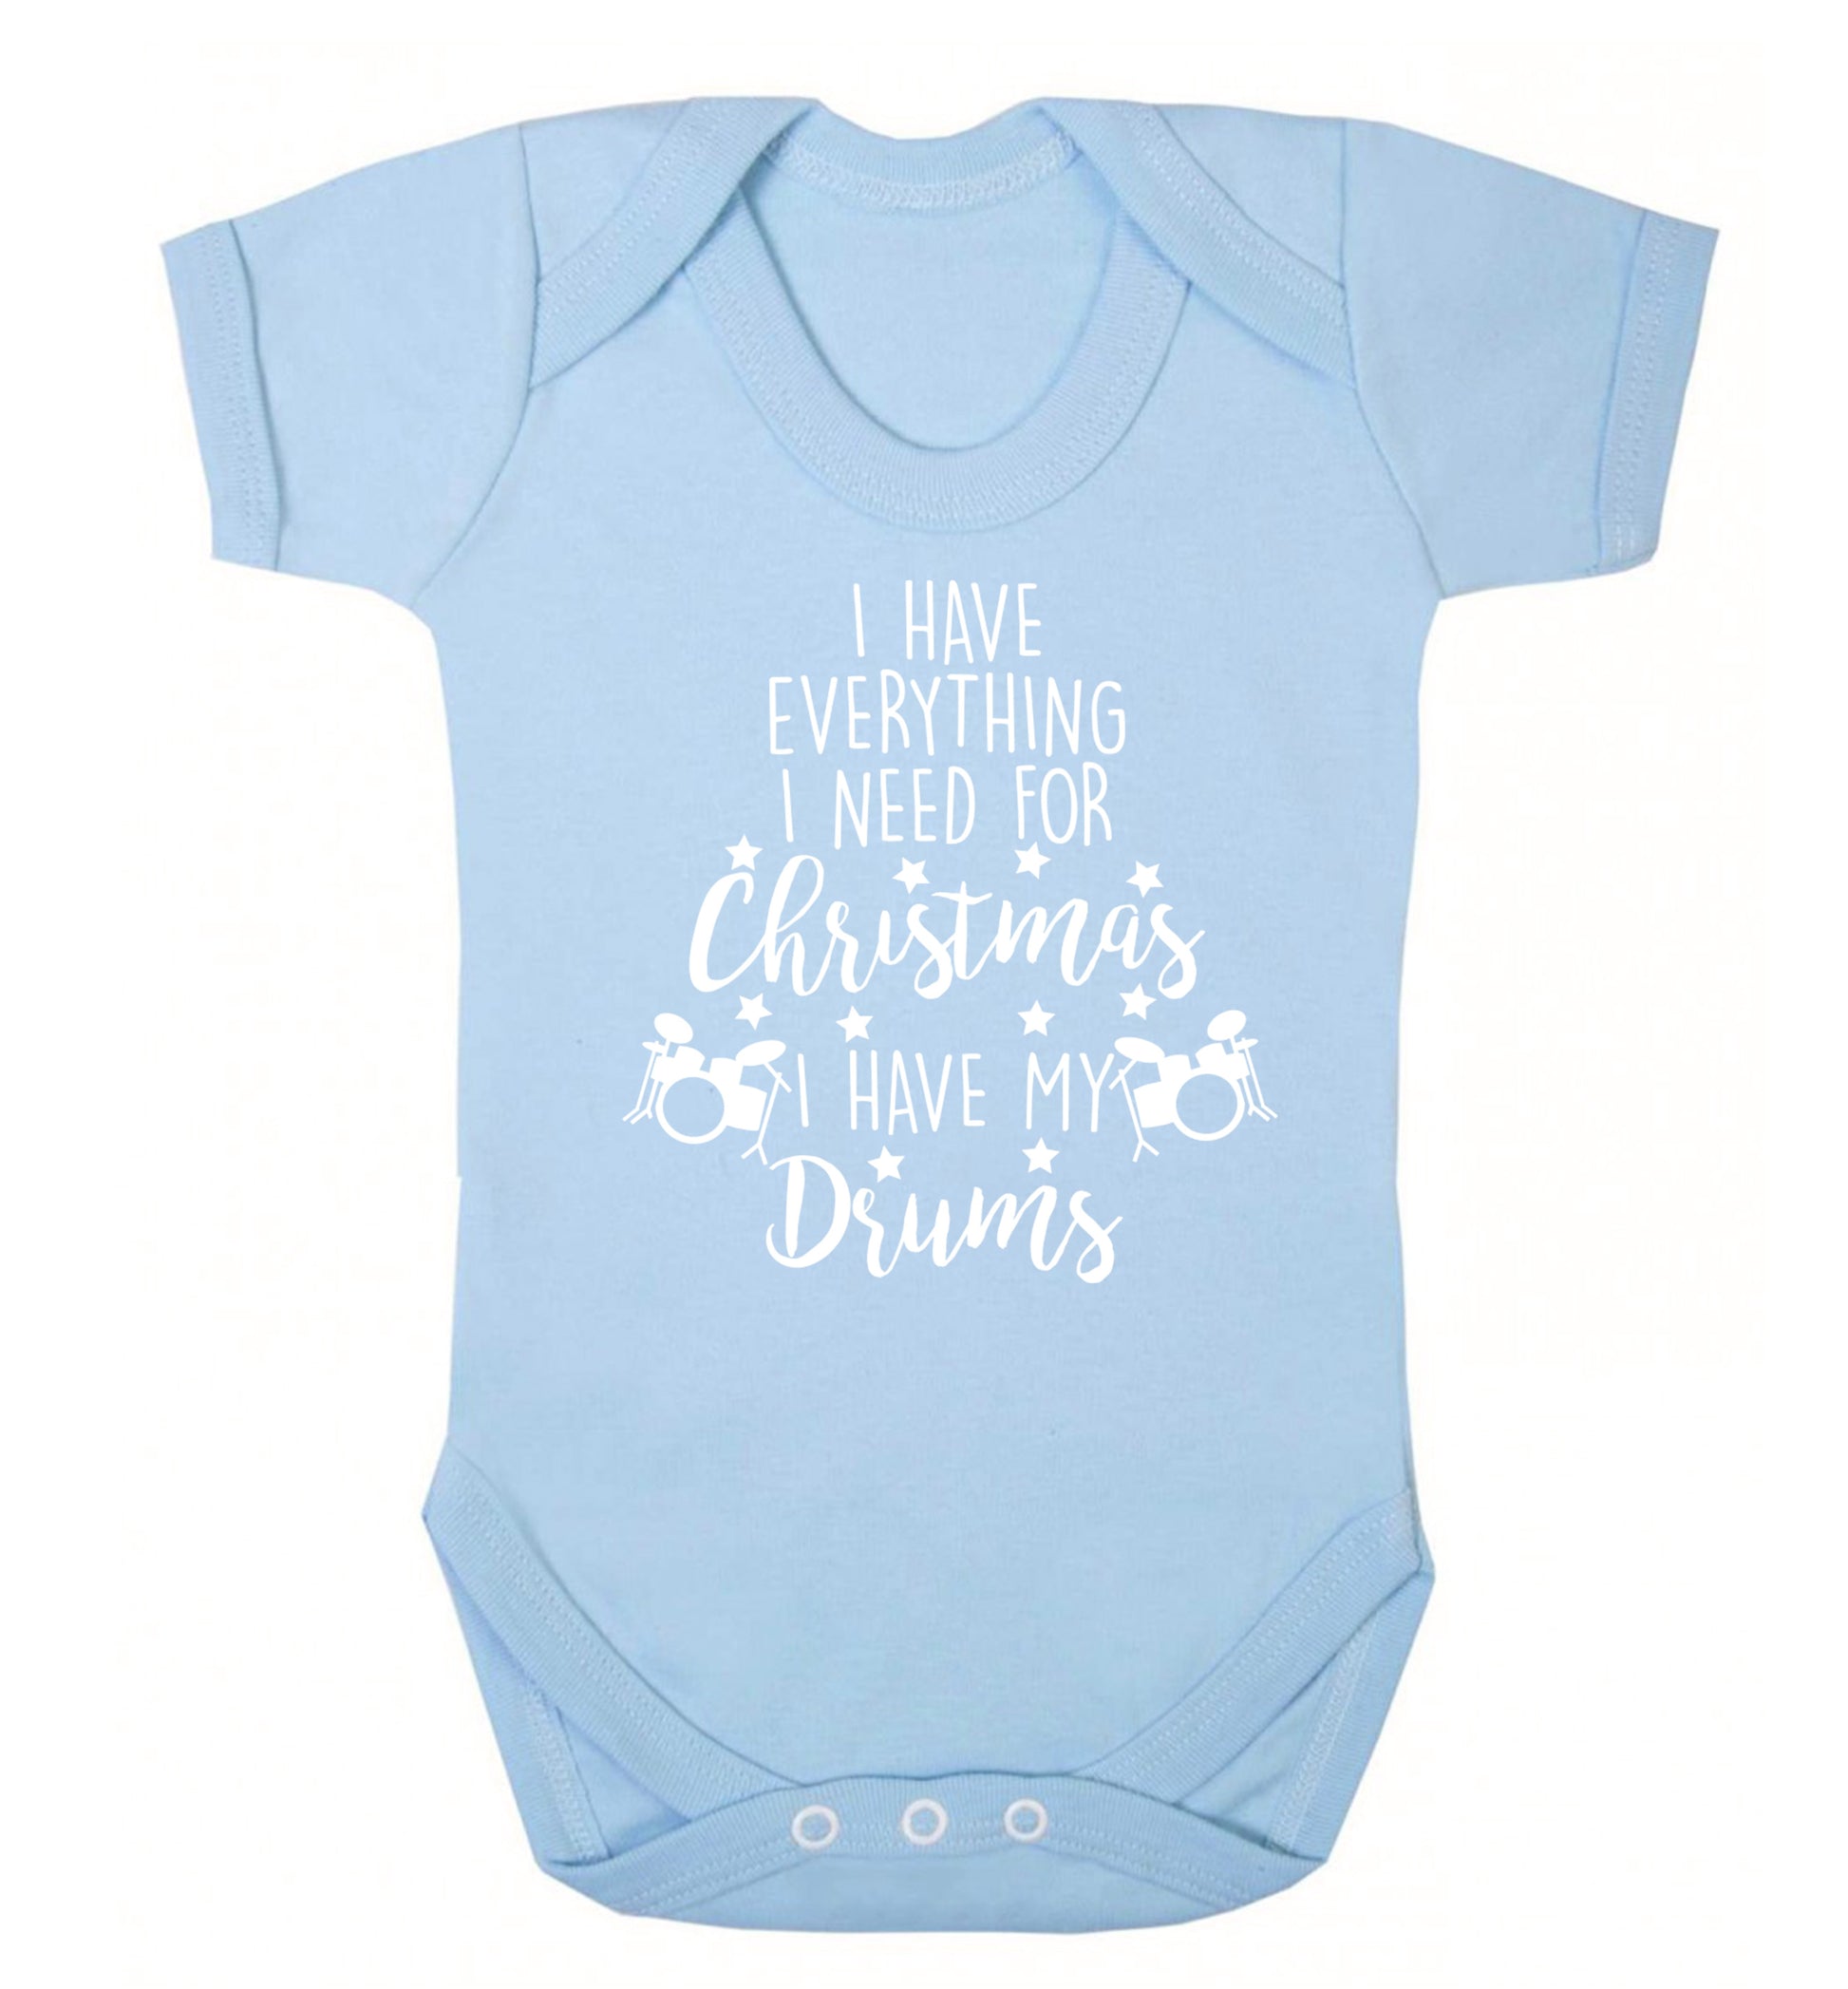 I have everything I need for Christmas I have my drums! Baby Vest pale blue 18-24 months